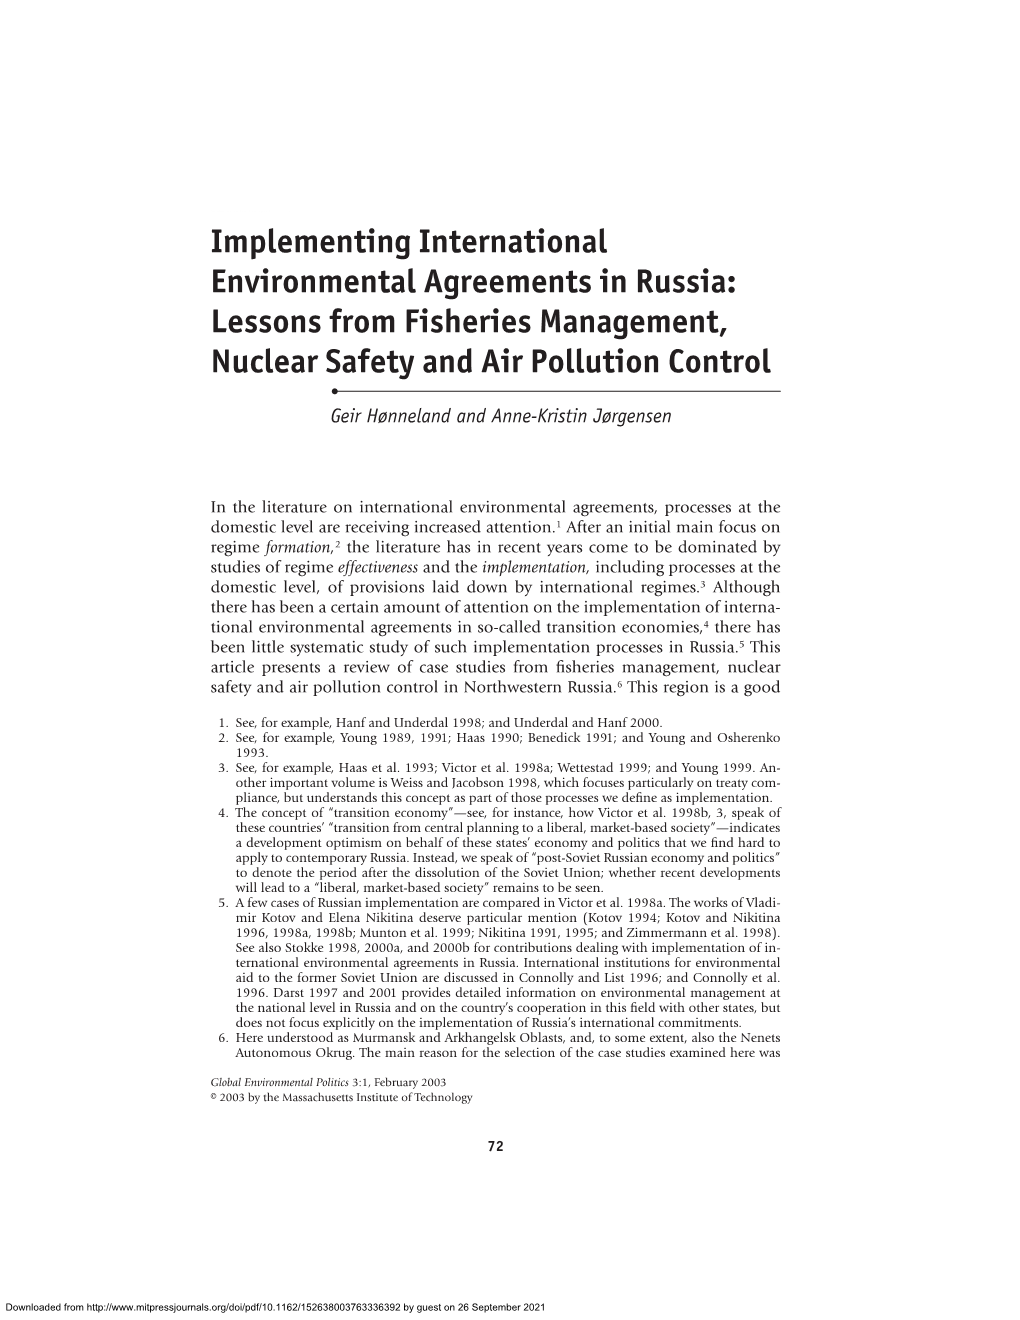 Implementing International Environmental Agreements in Russia